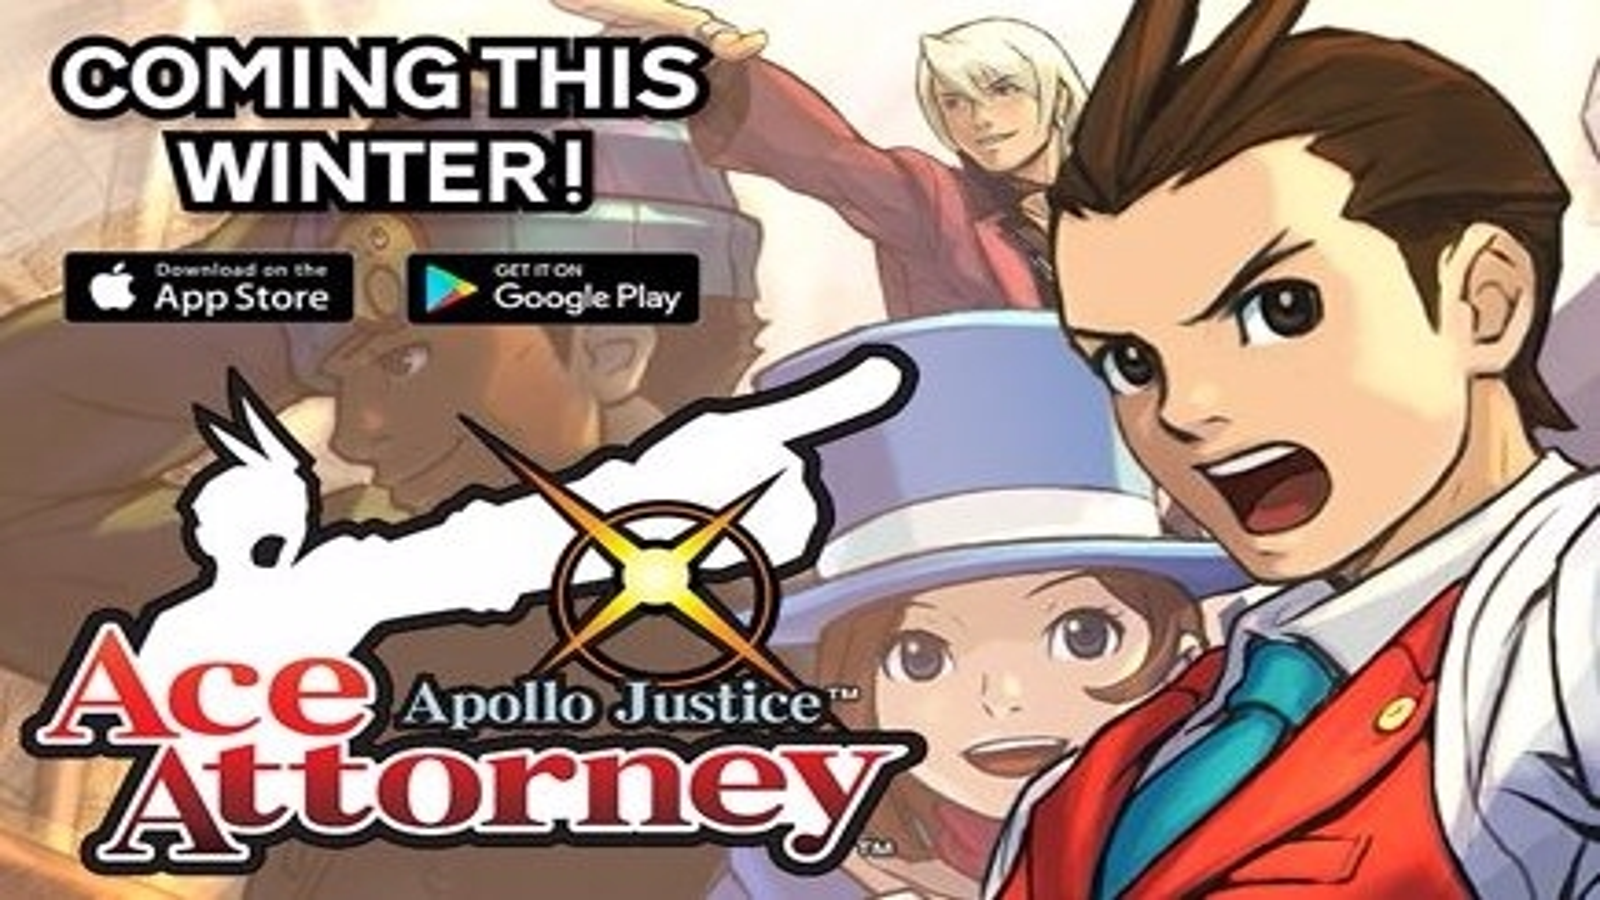 Xbox Game Pass anuncia Ace Attorney Trilogy